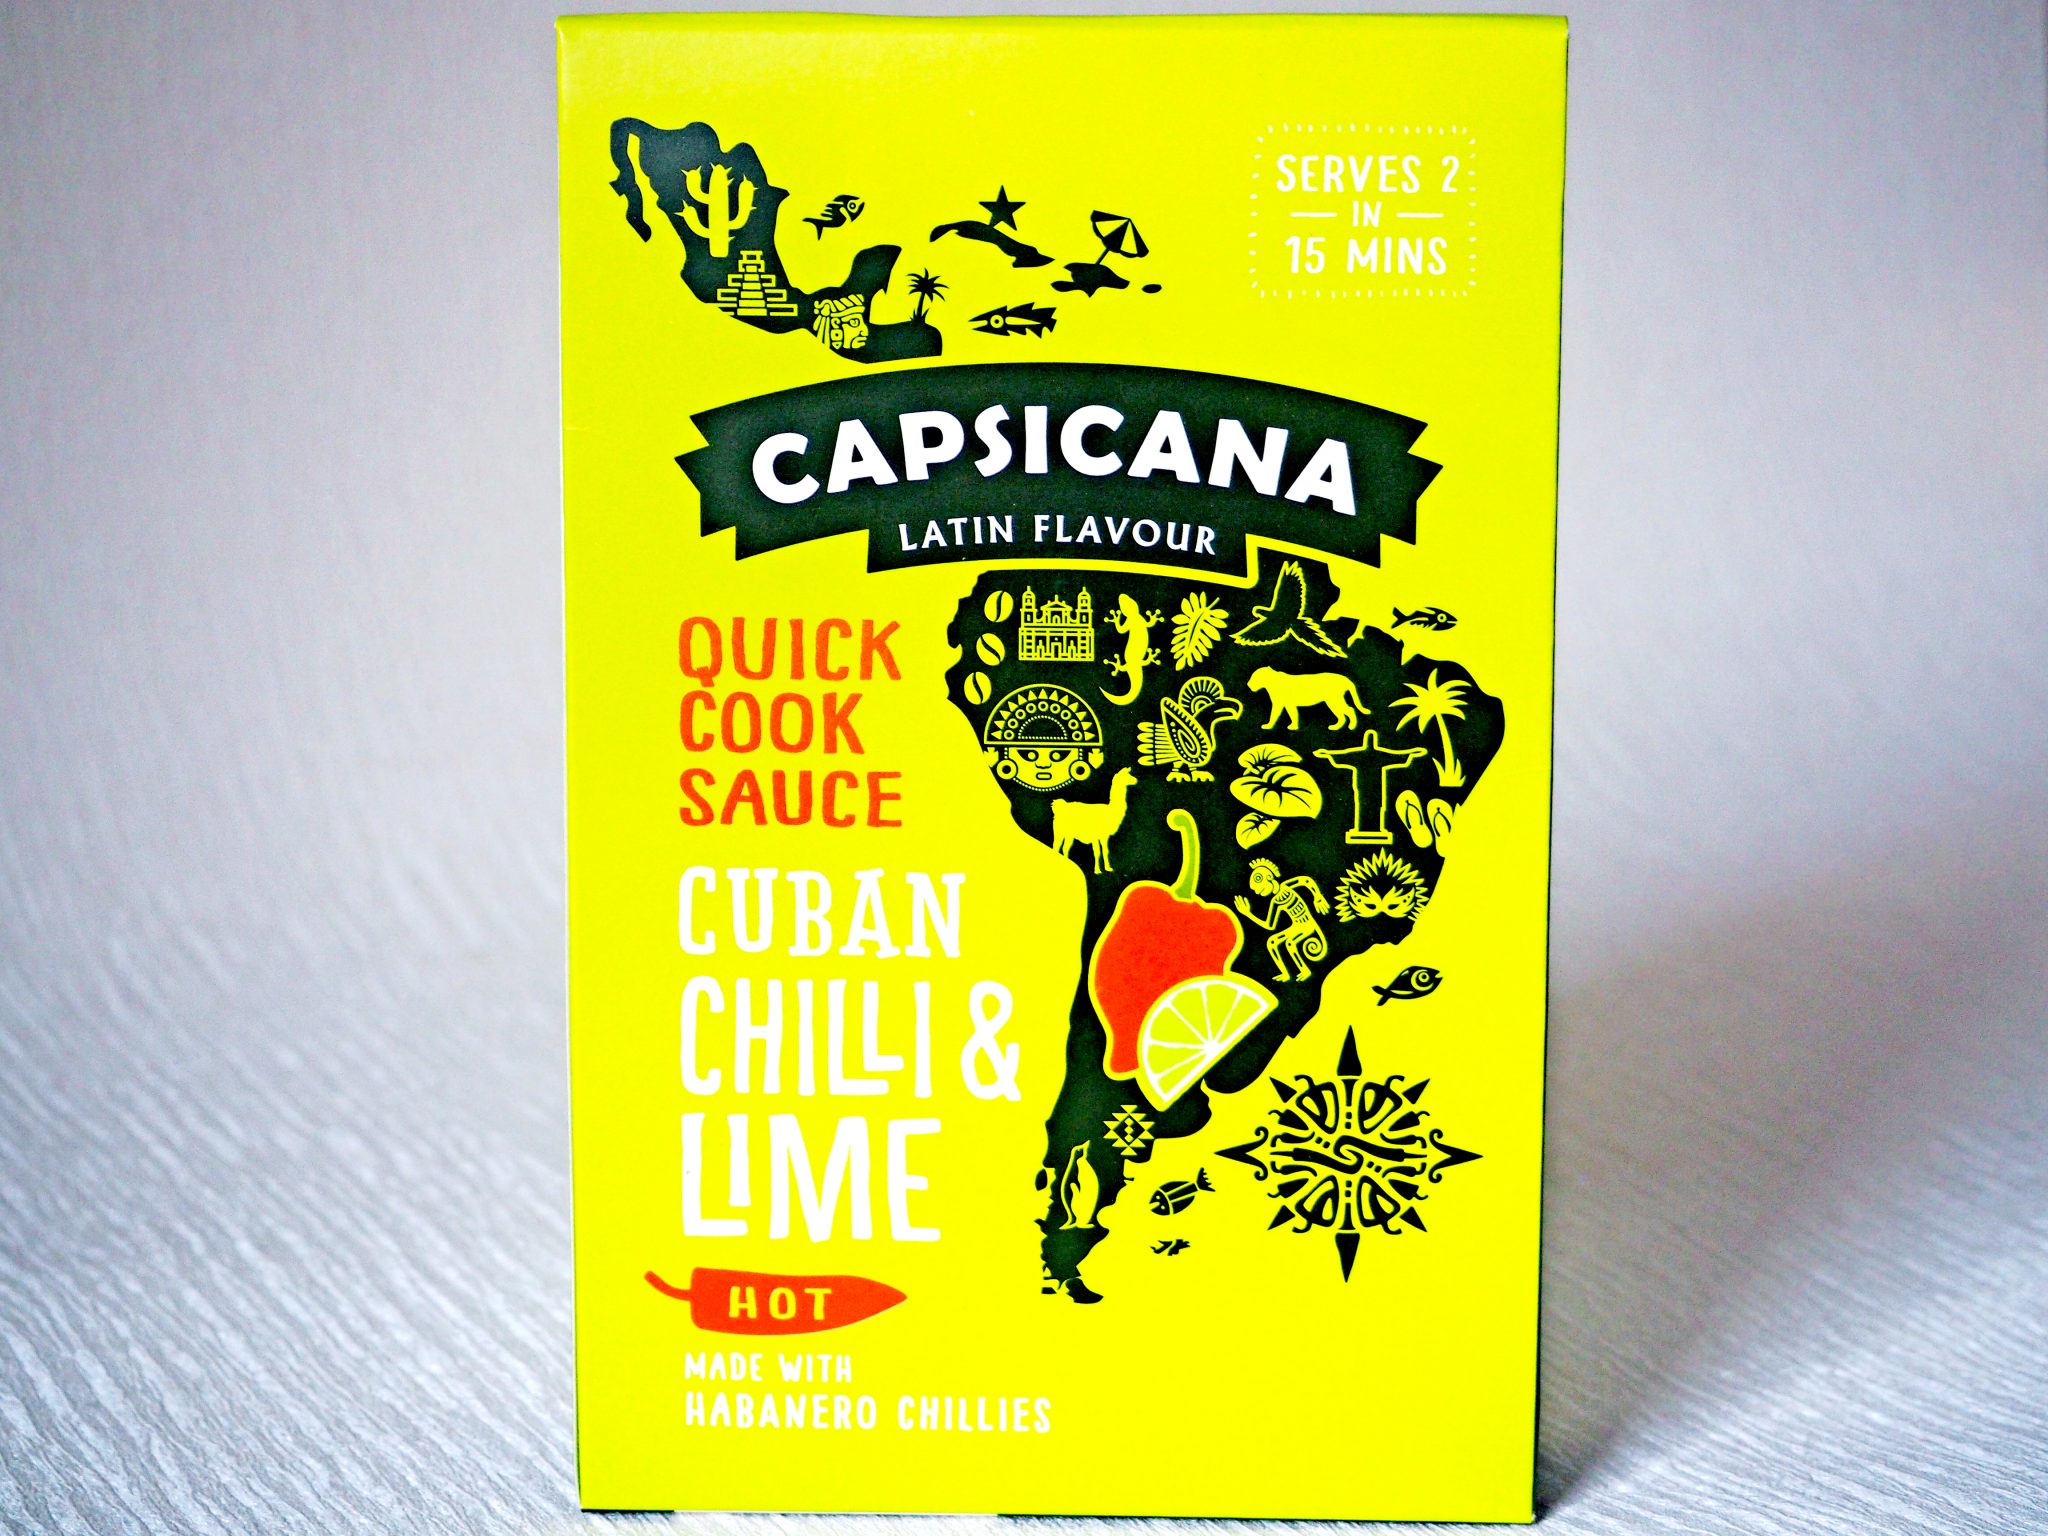 Laura Kate Lucas - Manchester Fashion, Food and Lifestyle Blogger | Capsicana Quick Cook Sauce Review and Recipe